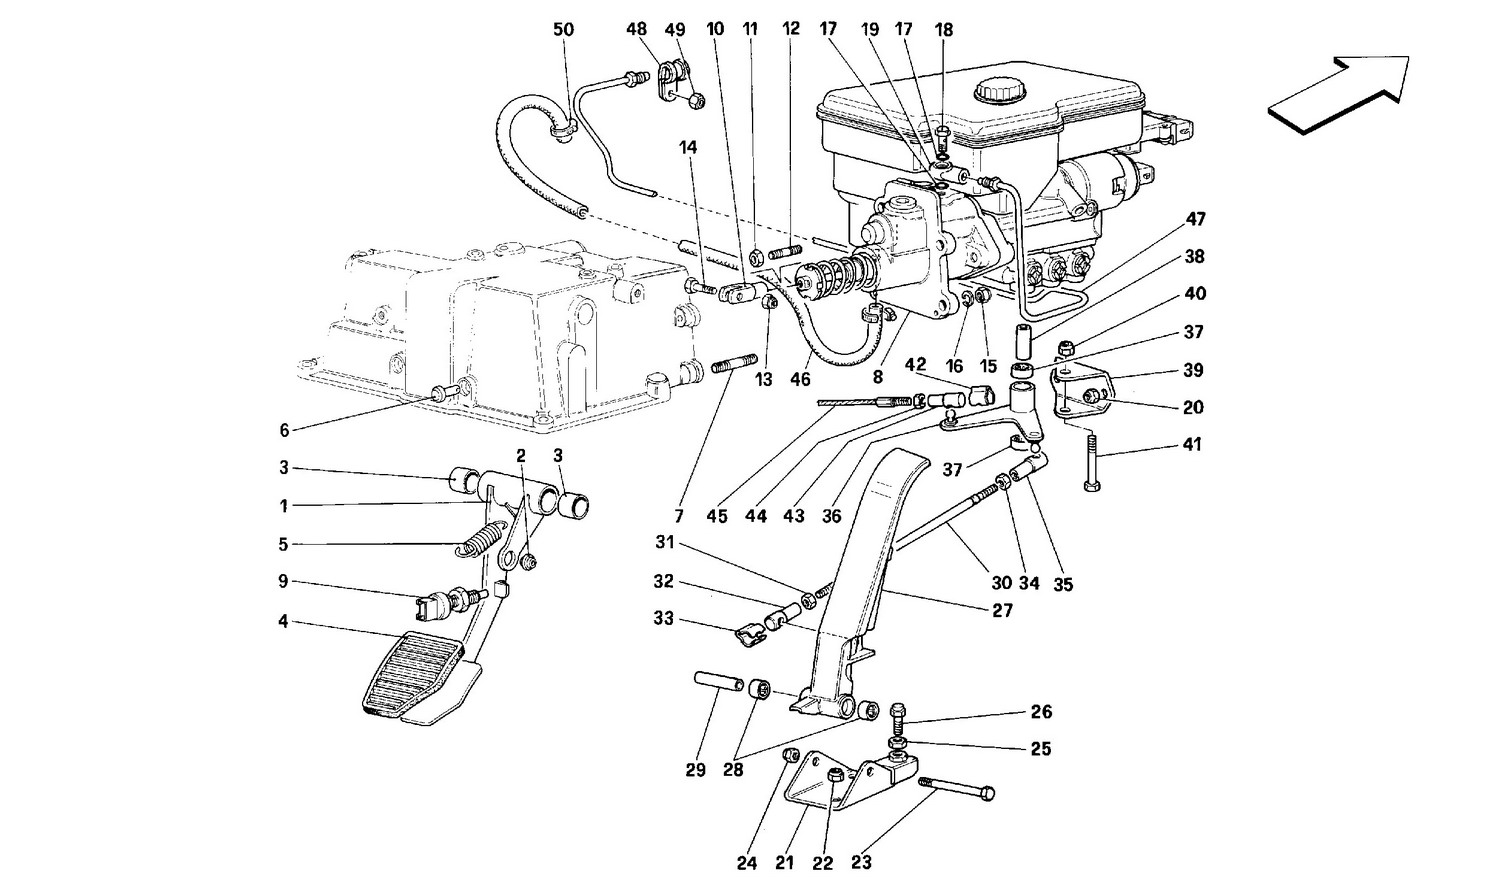 Schematic: Throttle Pedal And Brake Hydraulic System -Valid For Gd-